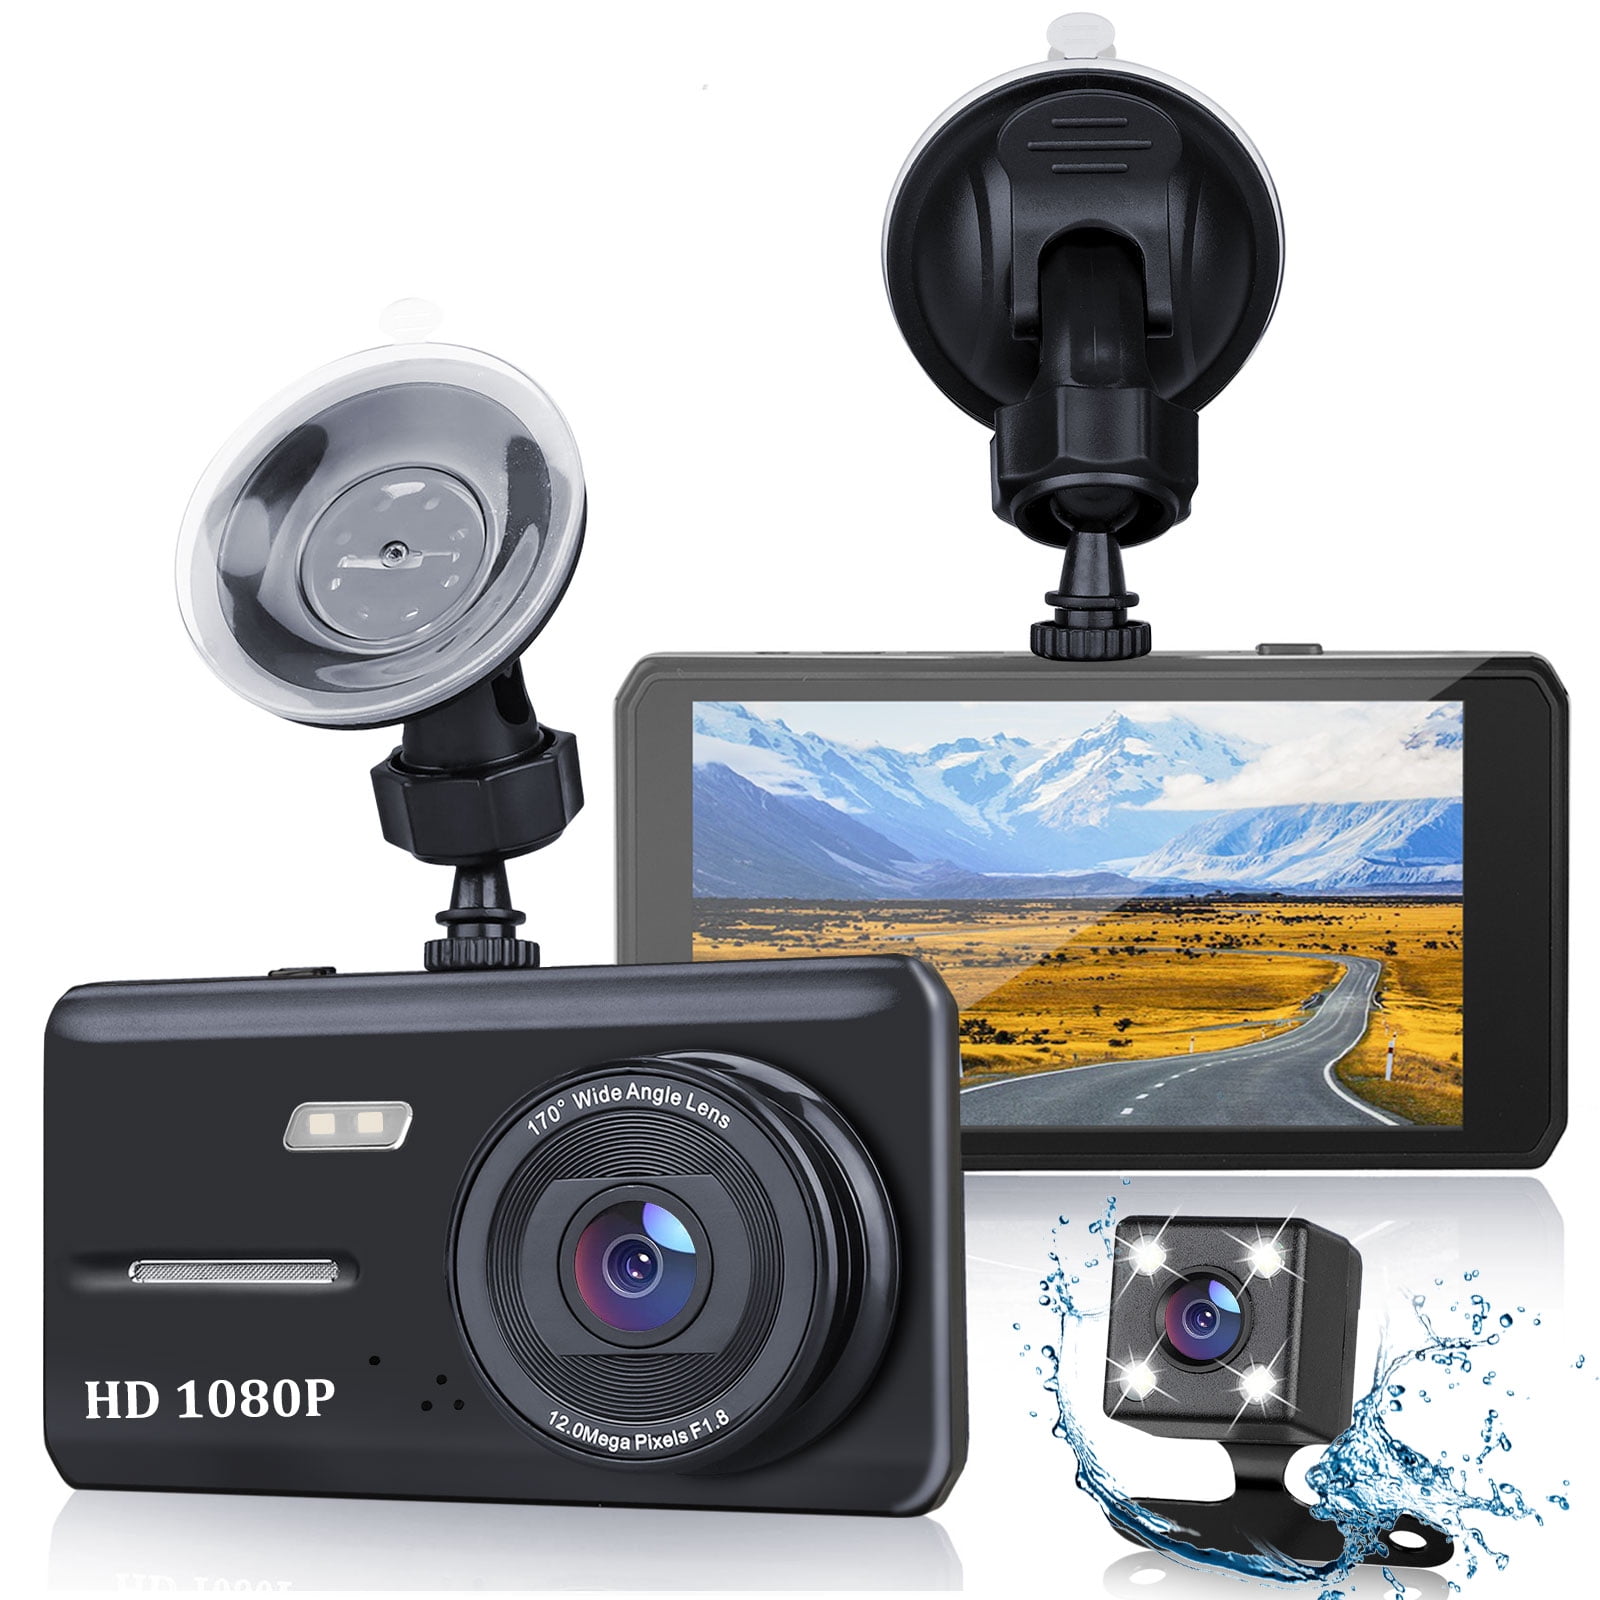 Dual Dash Cam Front And Rear Eeekit 1080p Hd Car Dvr Dashboard Camera Recorder With Night Vision 4 5 Inch Screen 170 Super Wide Angle G Sensor Parking Monitor Motion Detection Walmart Com